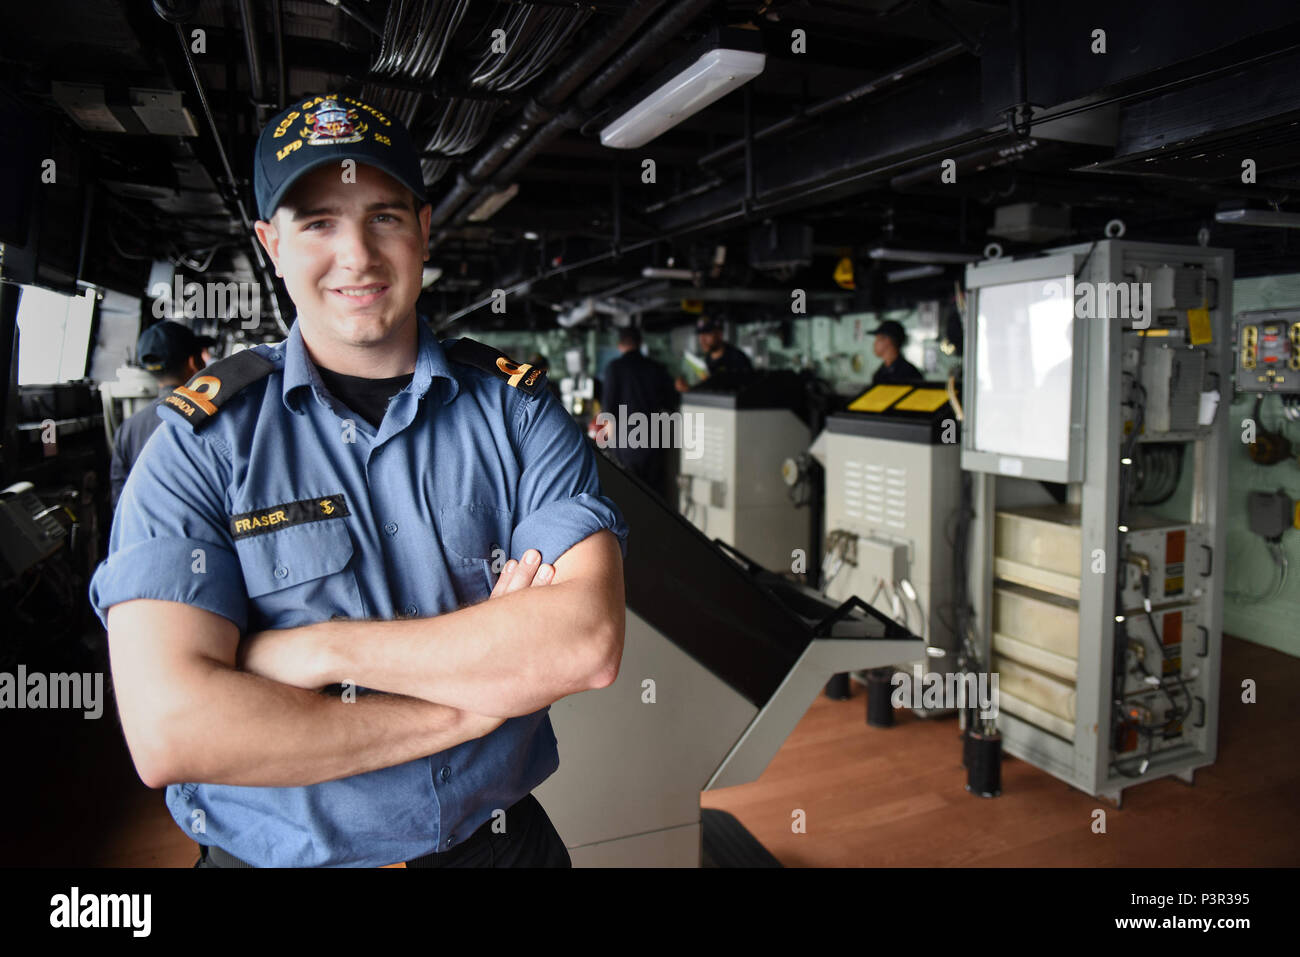 Acting Sub Lieutenant Jeremie Fraser Hometown: Saint-Jen-sur-richelieu,  Quebec, Canada Fraser, who served four years of infantry in the Army before  Attending the Royal Navy College of Canada has been riding aboard USS